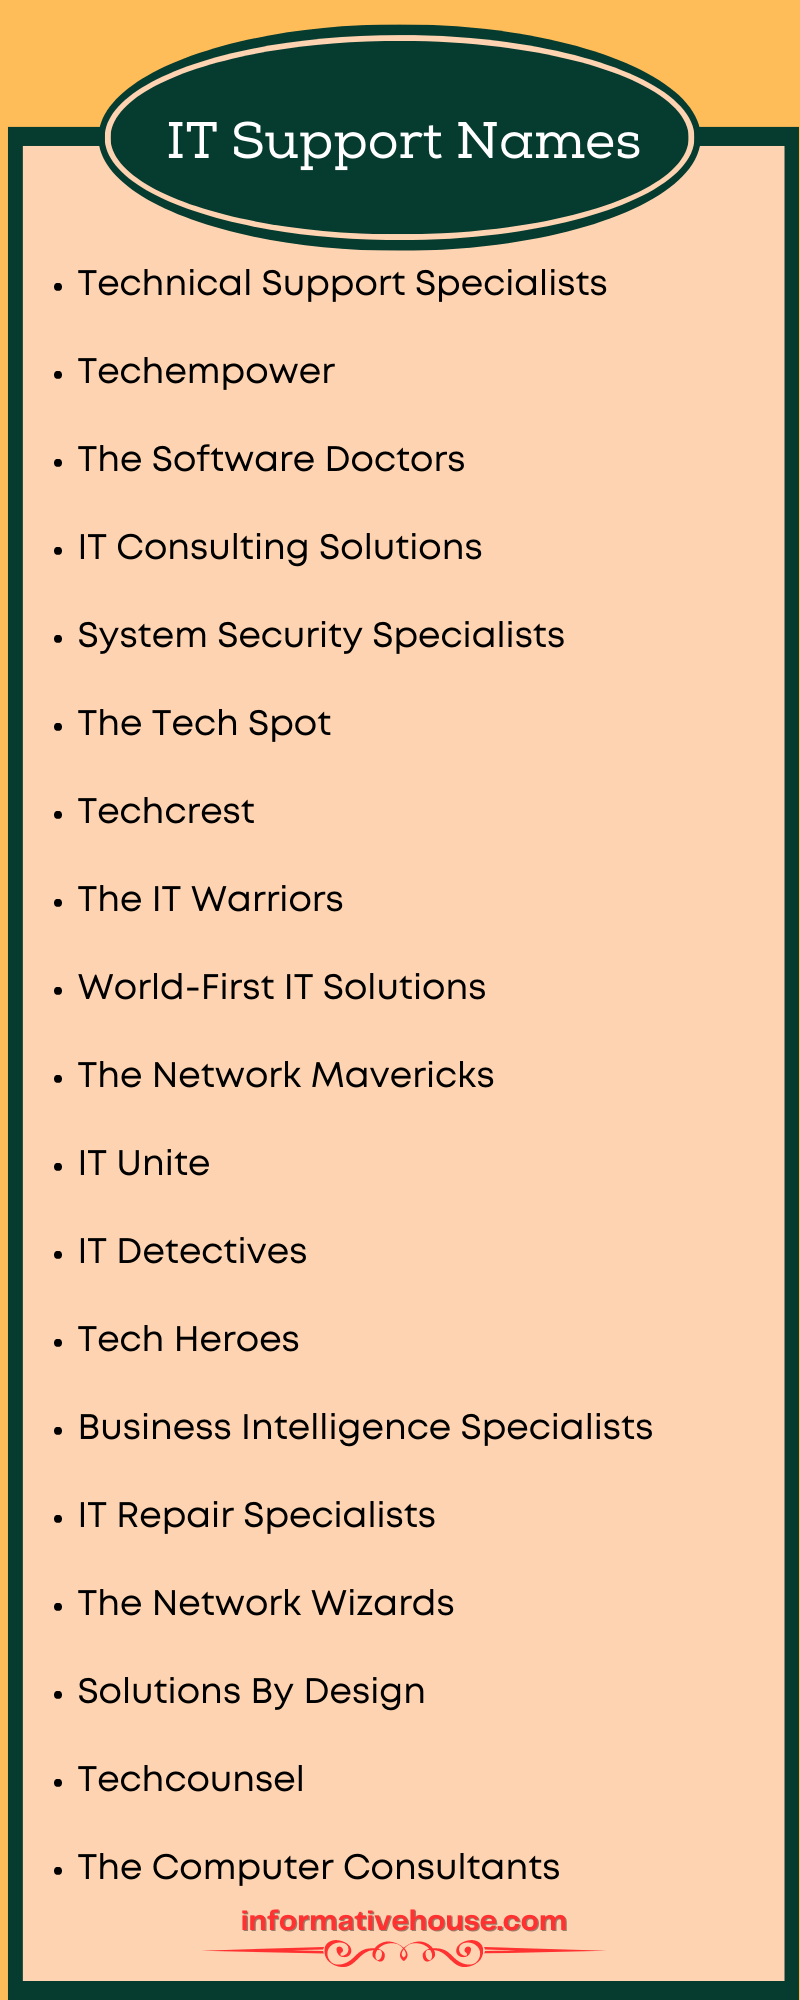 IT Support Names For IT Business